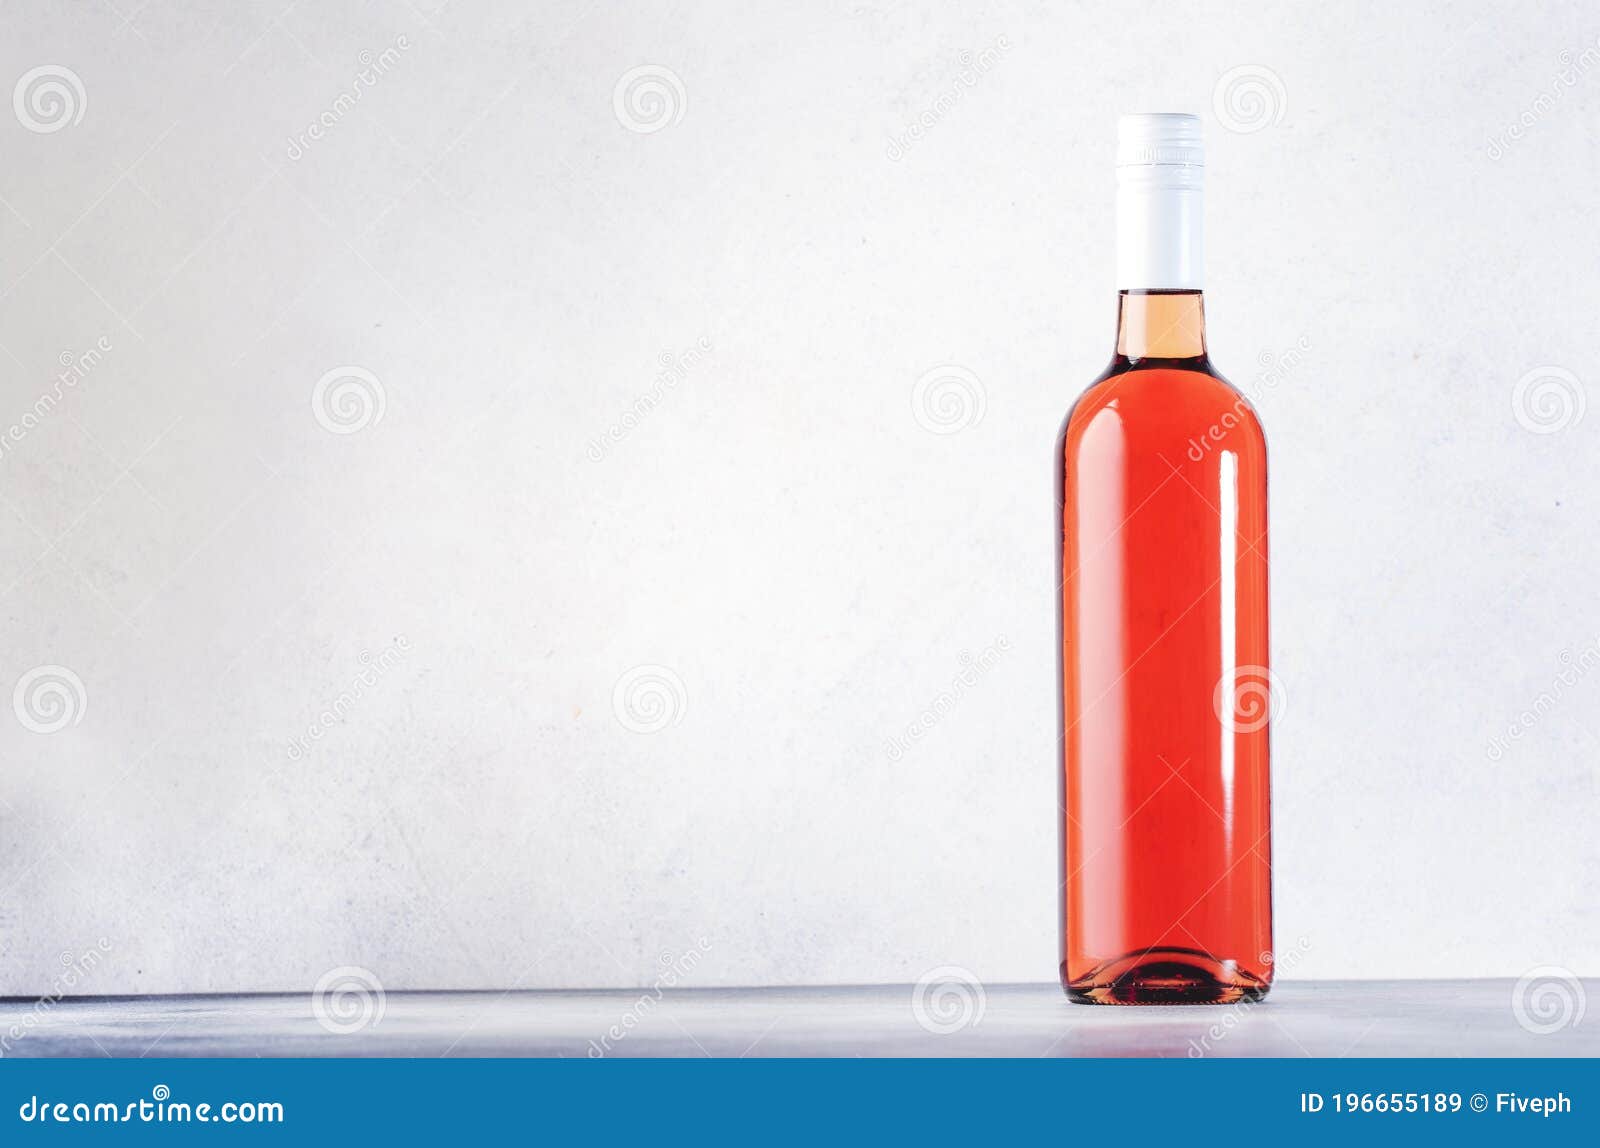 rose wine bottle on the gray table. pink rosado, rosato or blush wine tasting in wineshop, bar concept. copy space